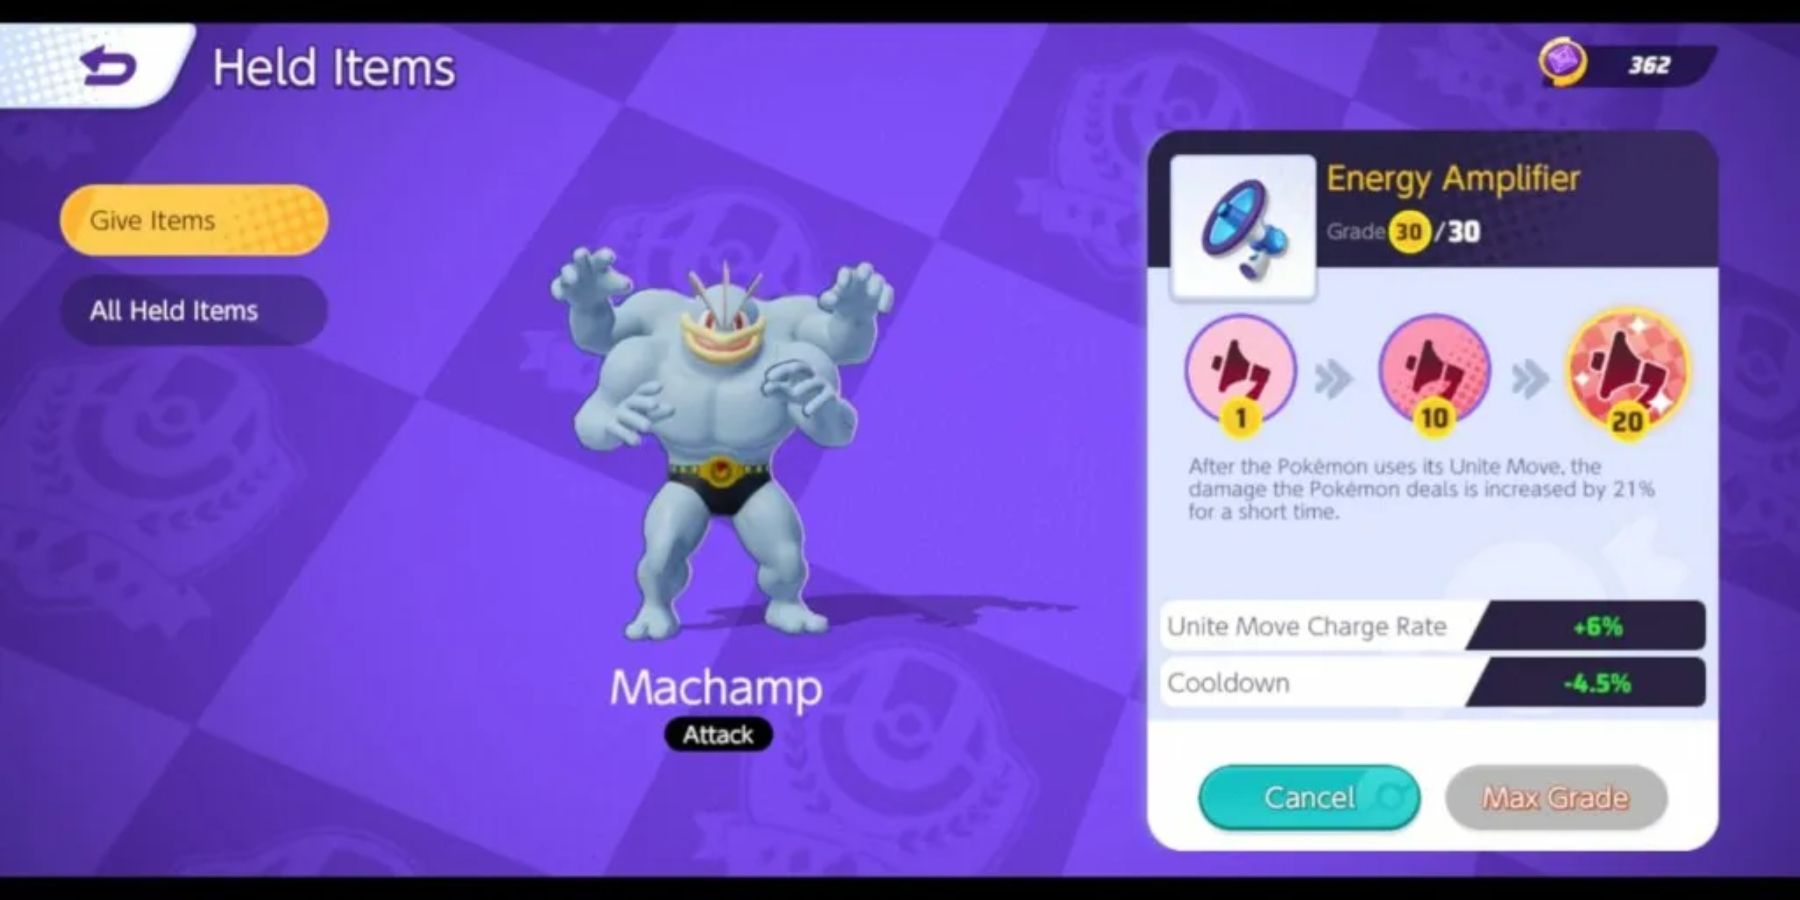 Machamp with Energy Amplifier. 